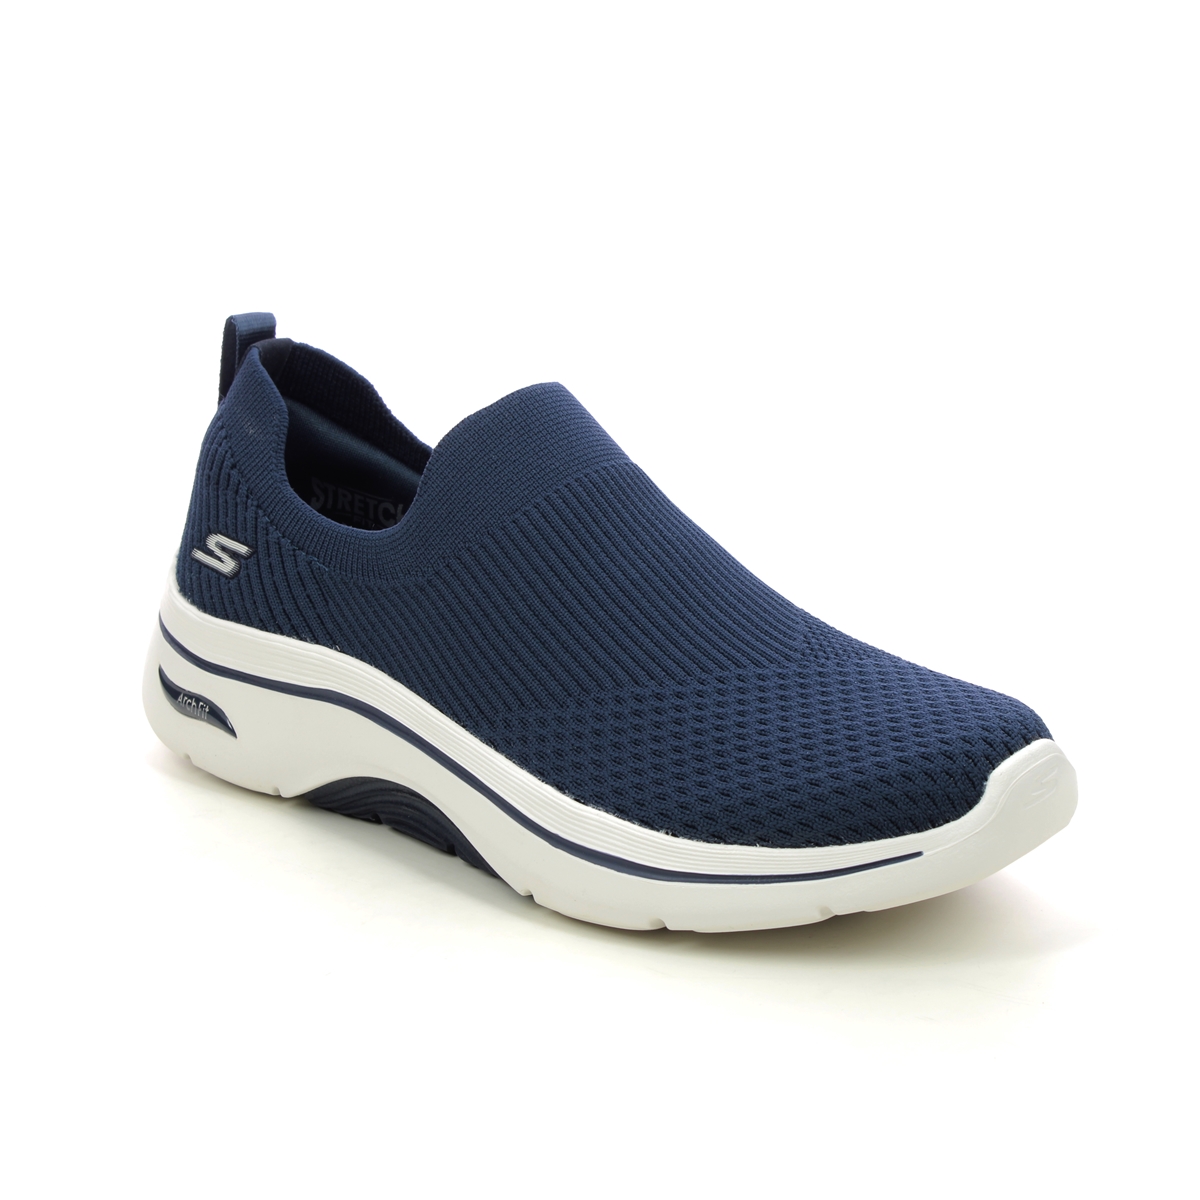 Skechers Arch Fit 2 Slip NVW Navy Womens trainers 125300 in a Plain Textile in Size 8